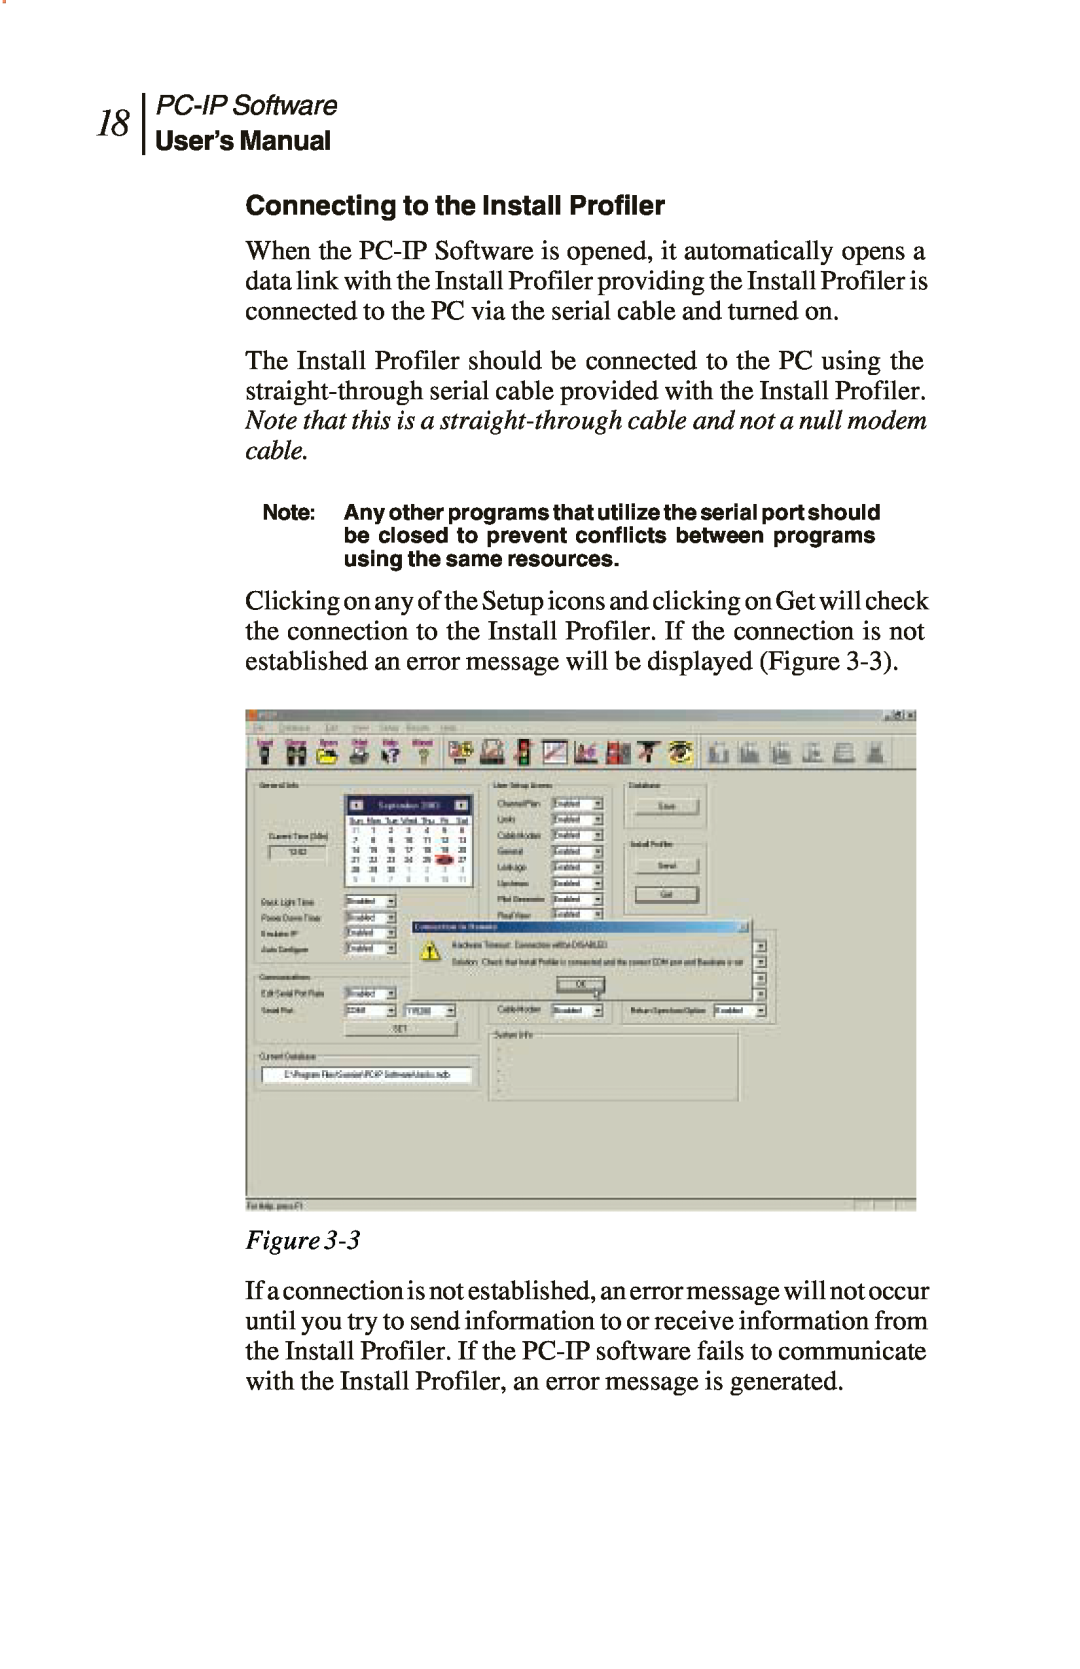 Sunrise Global CM100 IP, CM250 IP, and CM500 IP Connecting to the Install Profiler, PC-IPSoftware, User’s Manual, Figure 